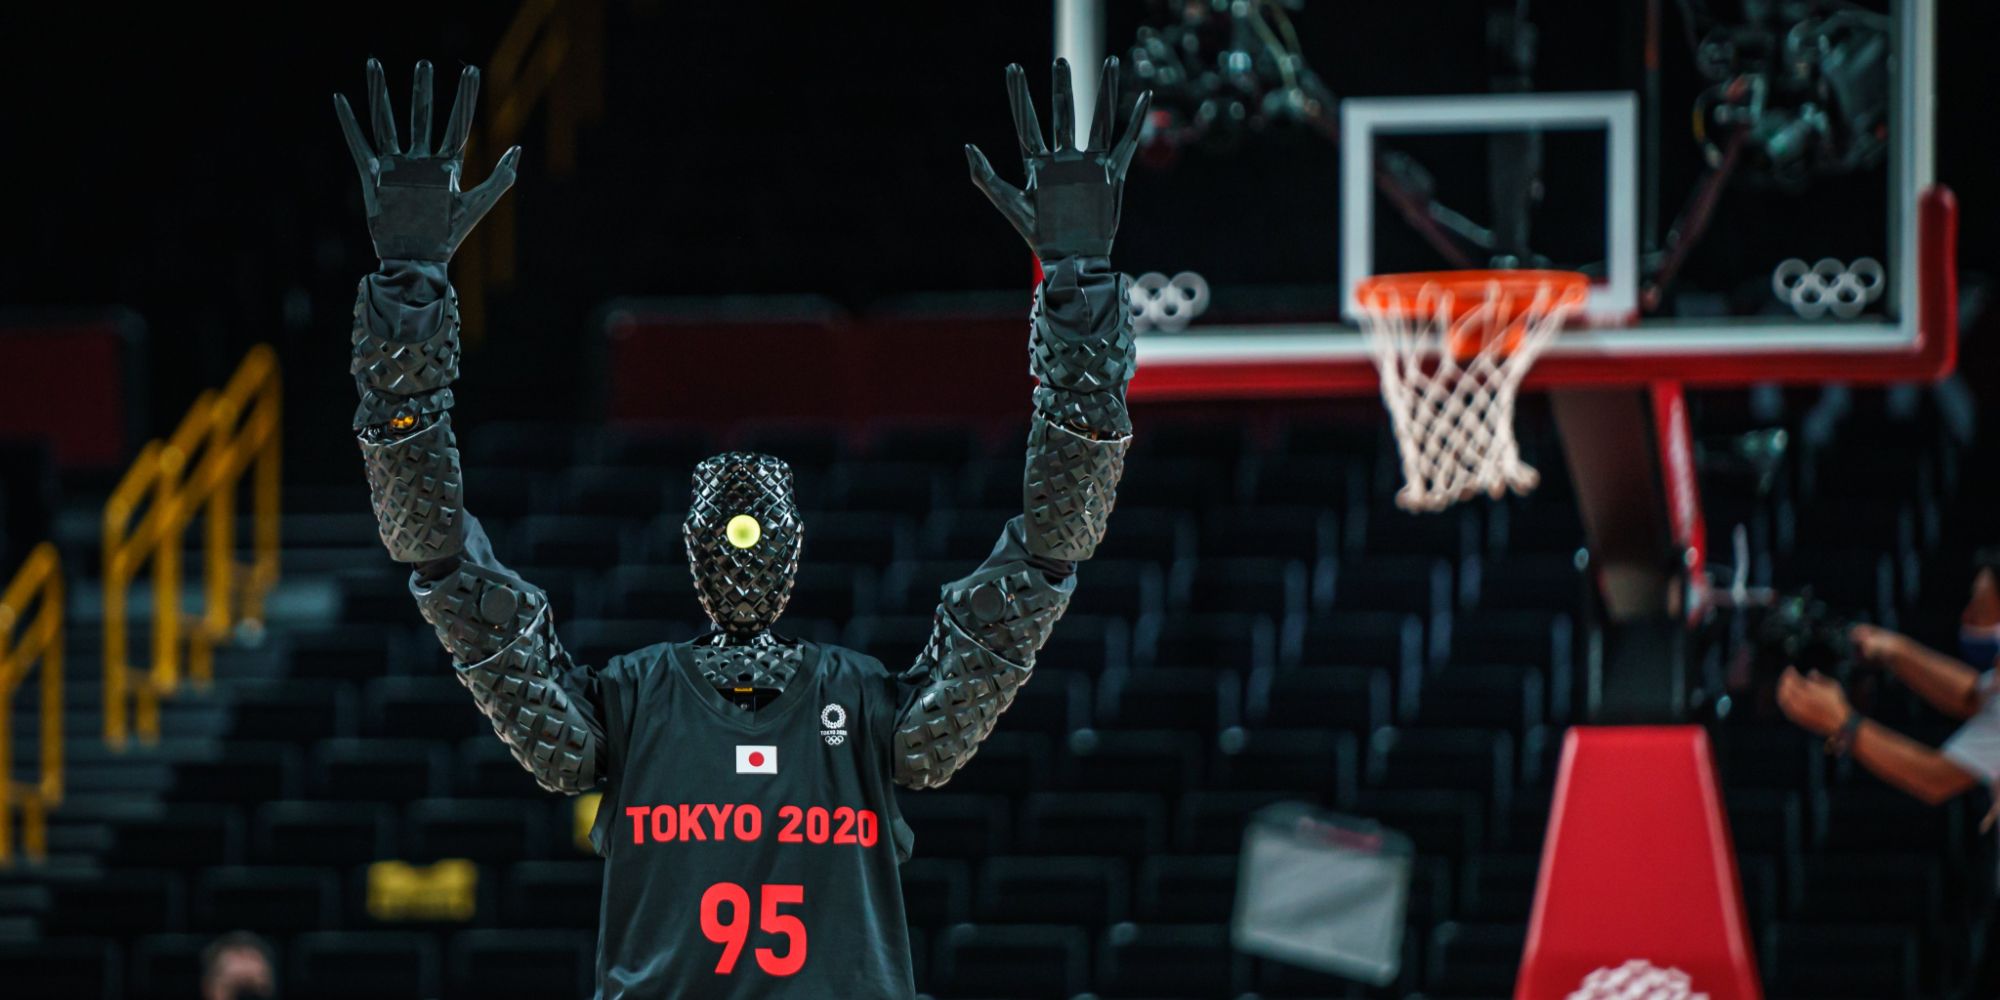 Japan Built A Basketball Robot For The Olympics, And It’s Awesome